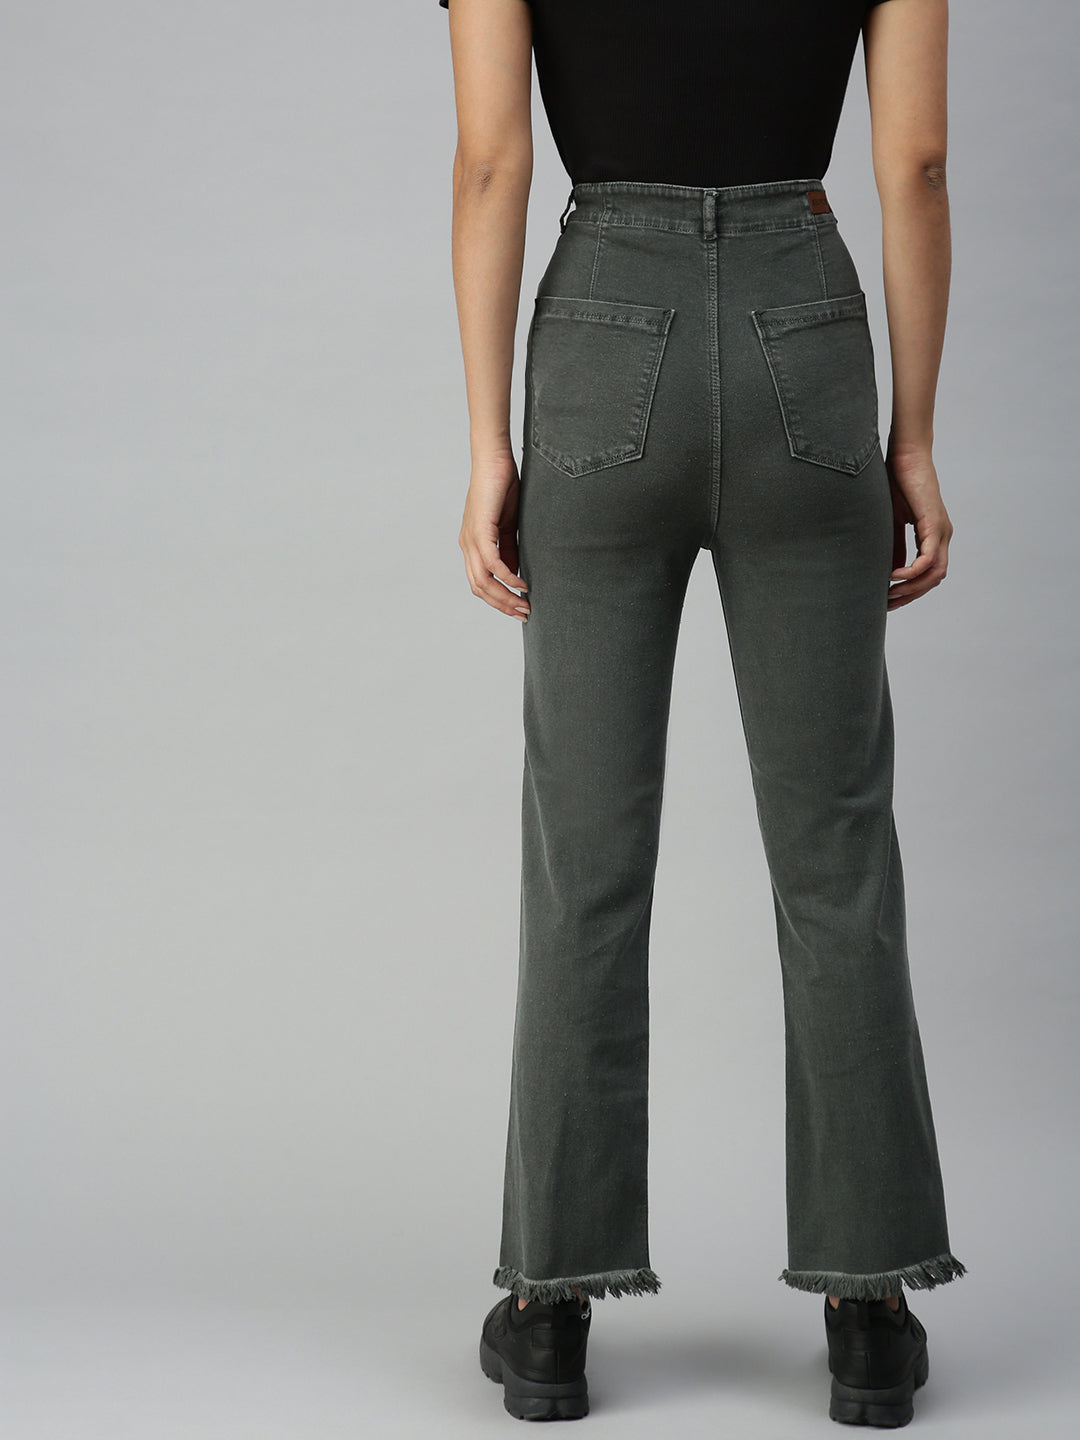 Women's Grey Solid Denim Relaxed Jeans